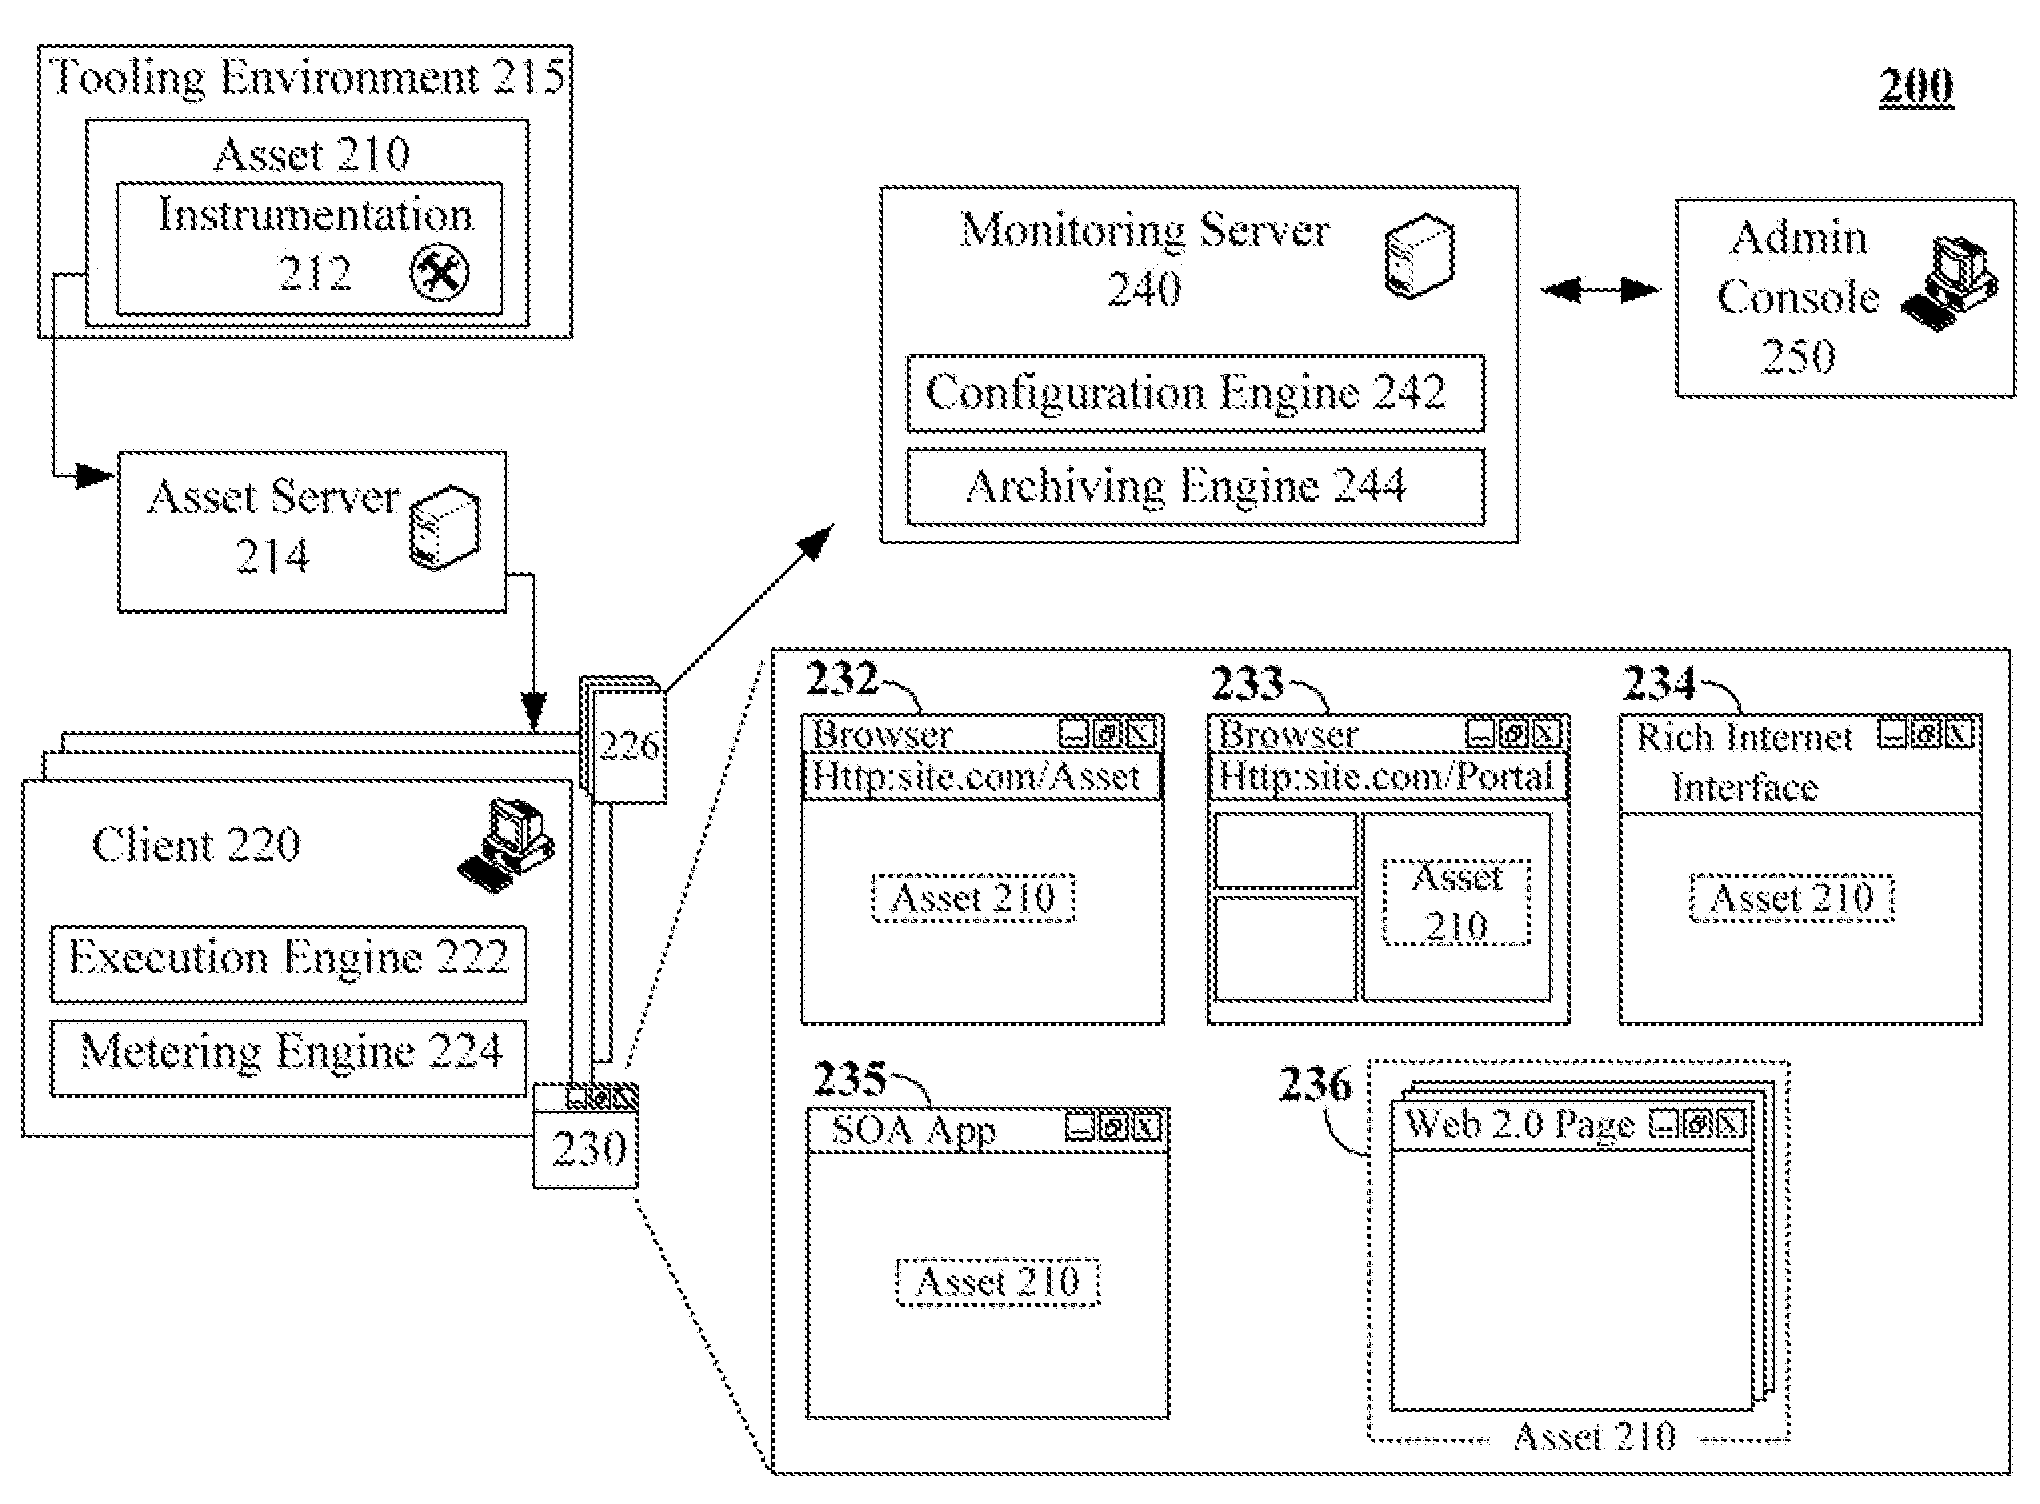 Non-intrusive asset monitoring framework for runtime configuration of deployable software assets